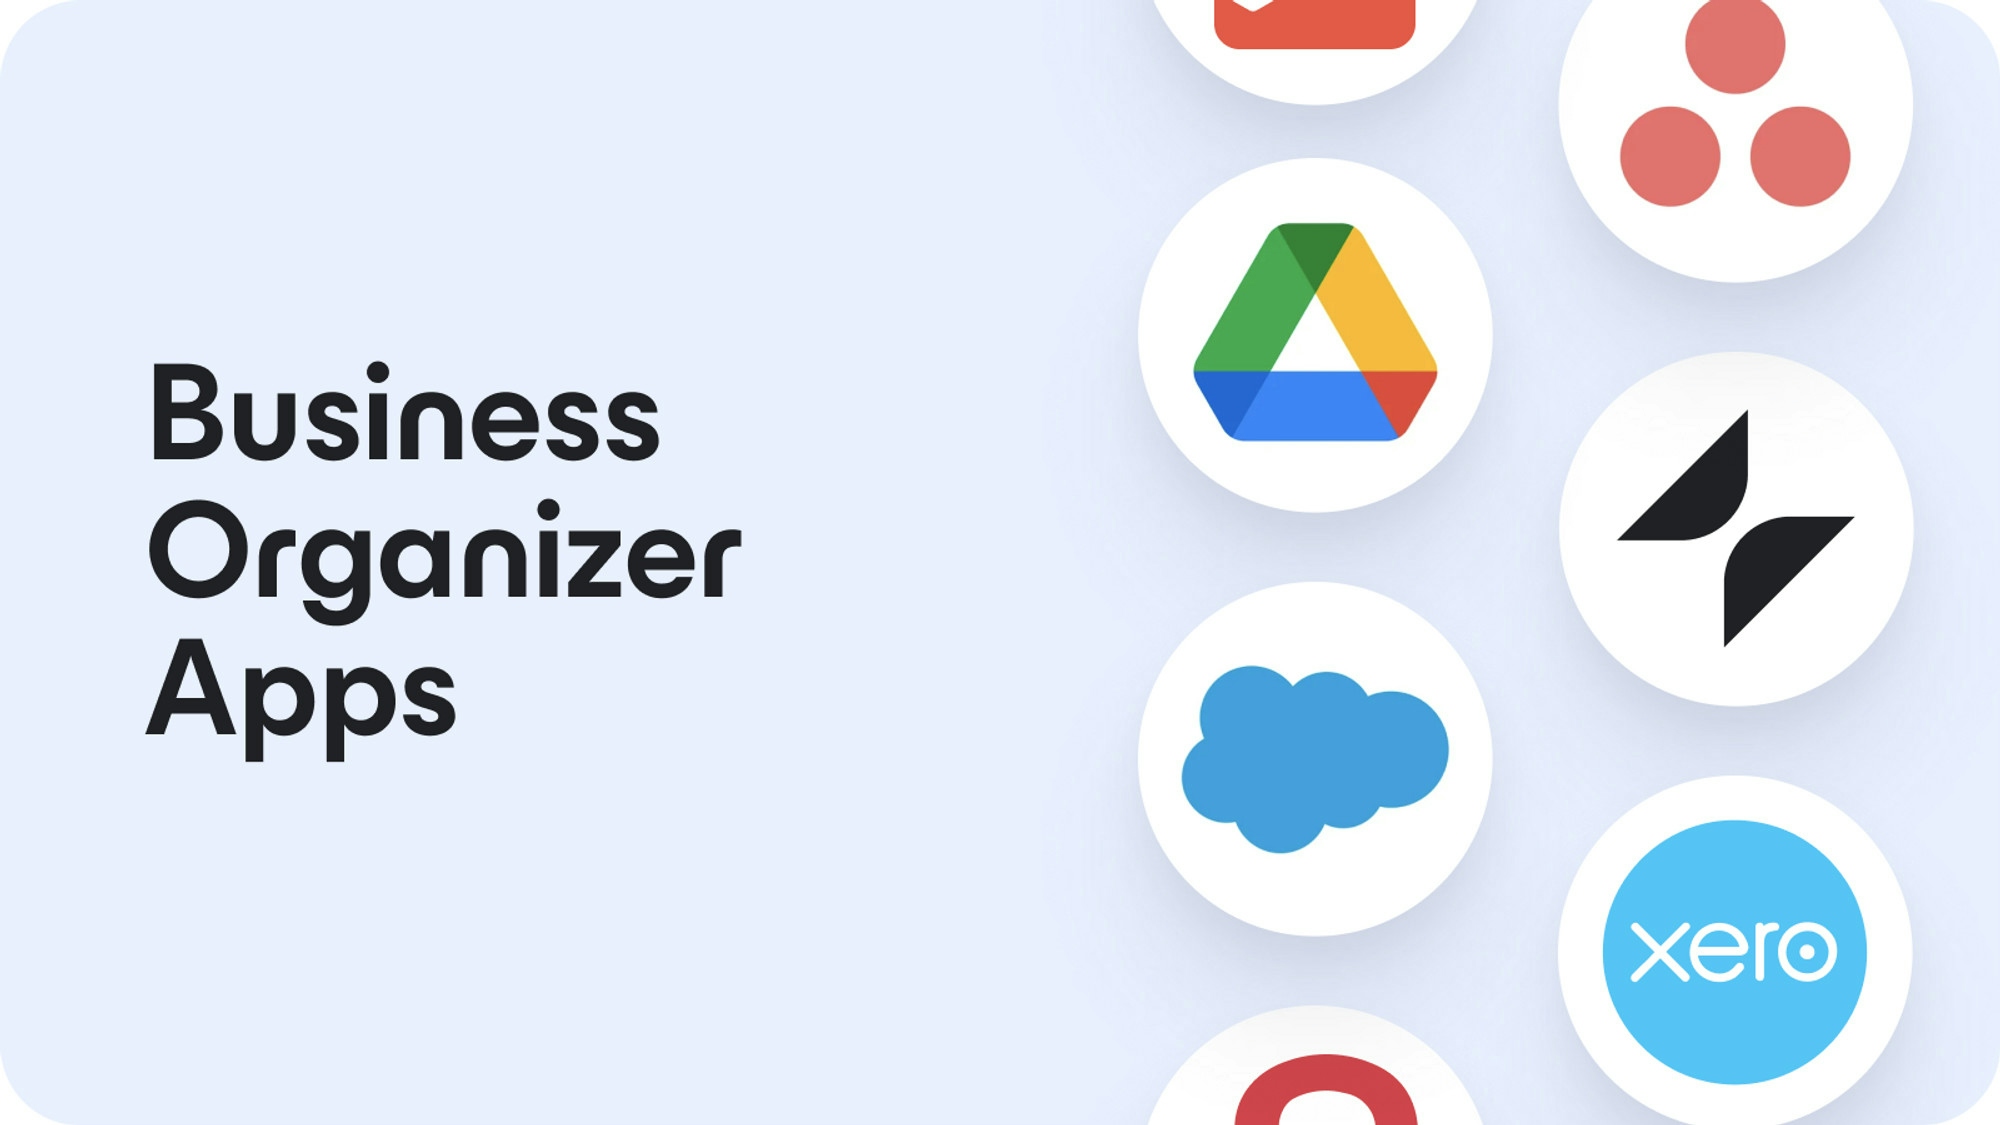 8 Awesome Business Organizer Apps to Keep Your Workplace Efficient